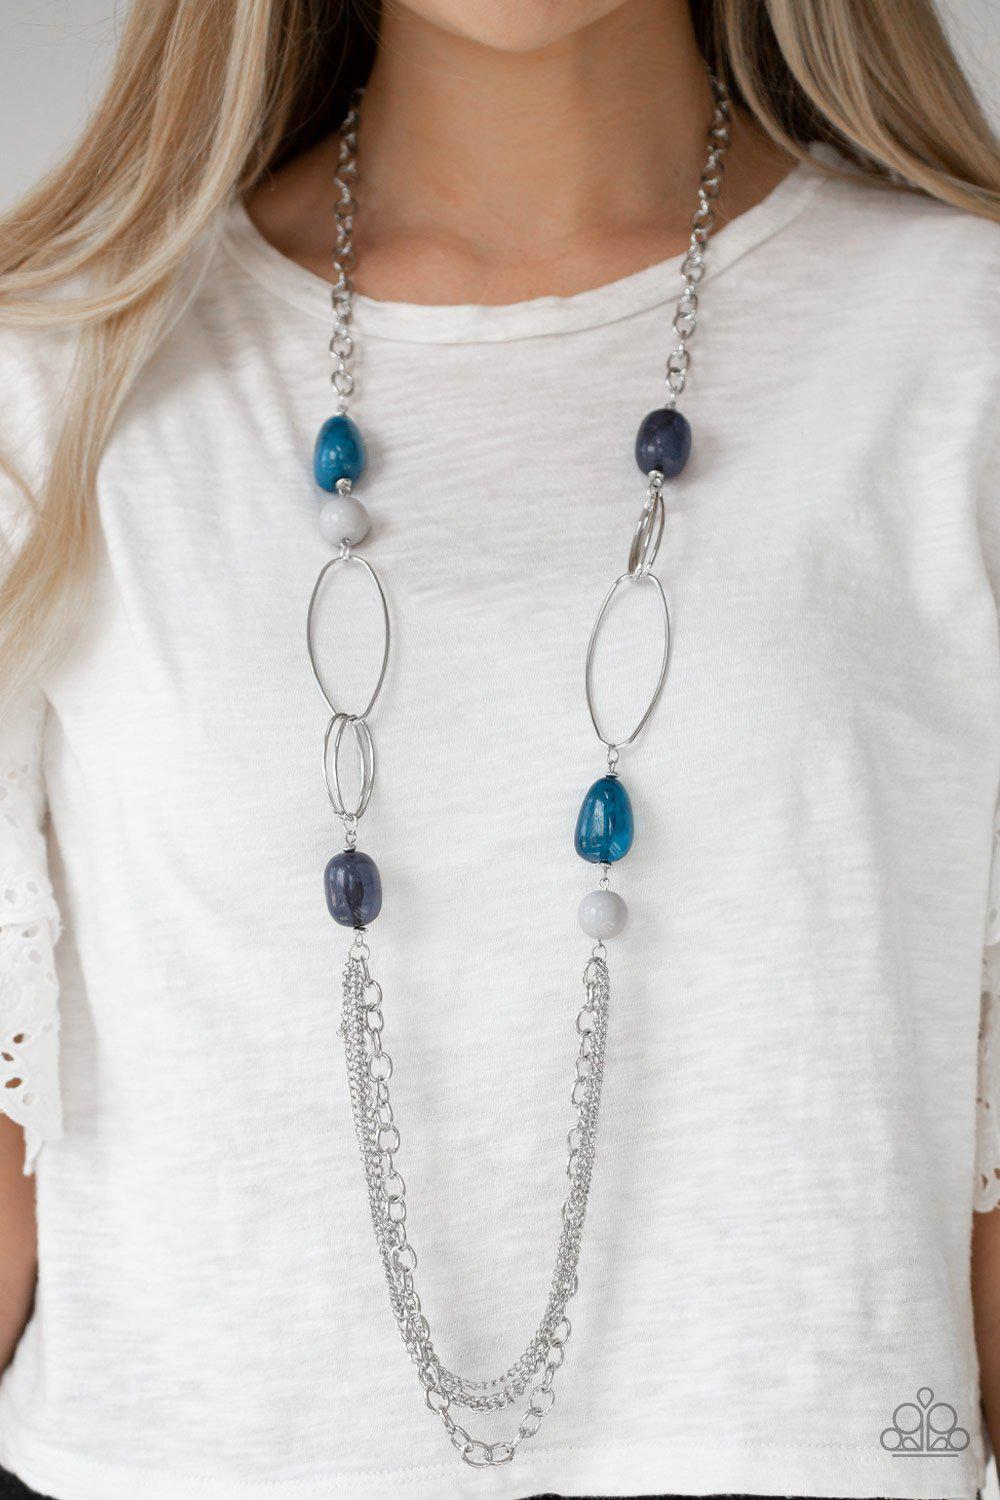 Pleasant Promenade Multi Blue and Gray Necklace - Paparazzi Accessories - model -CarasShop.com - $5 Jewelry by Cara Jewels